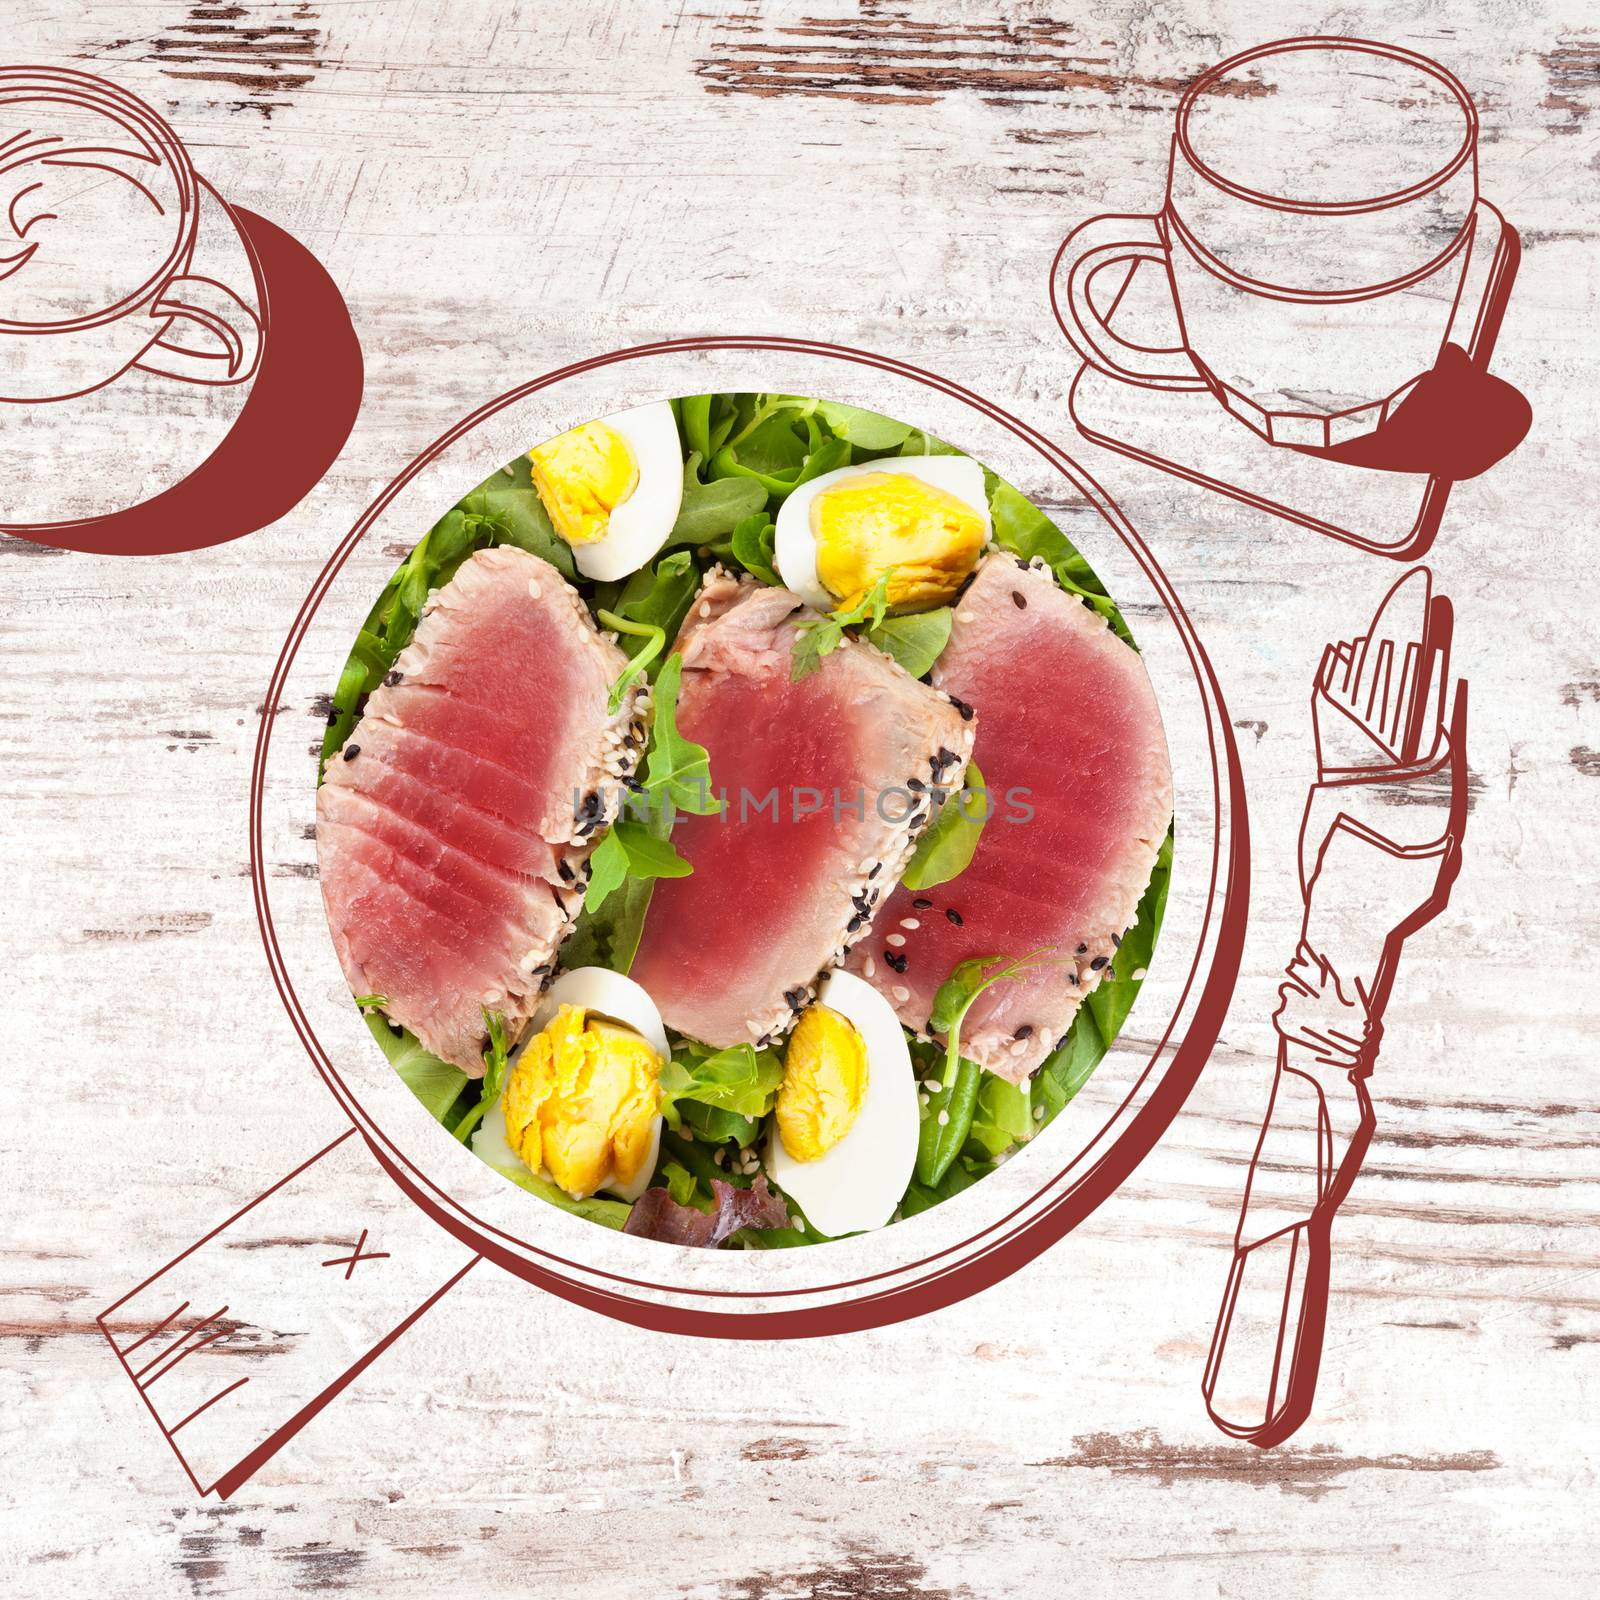 Delicious tuna steak with salad. by eskymaks